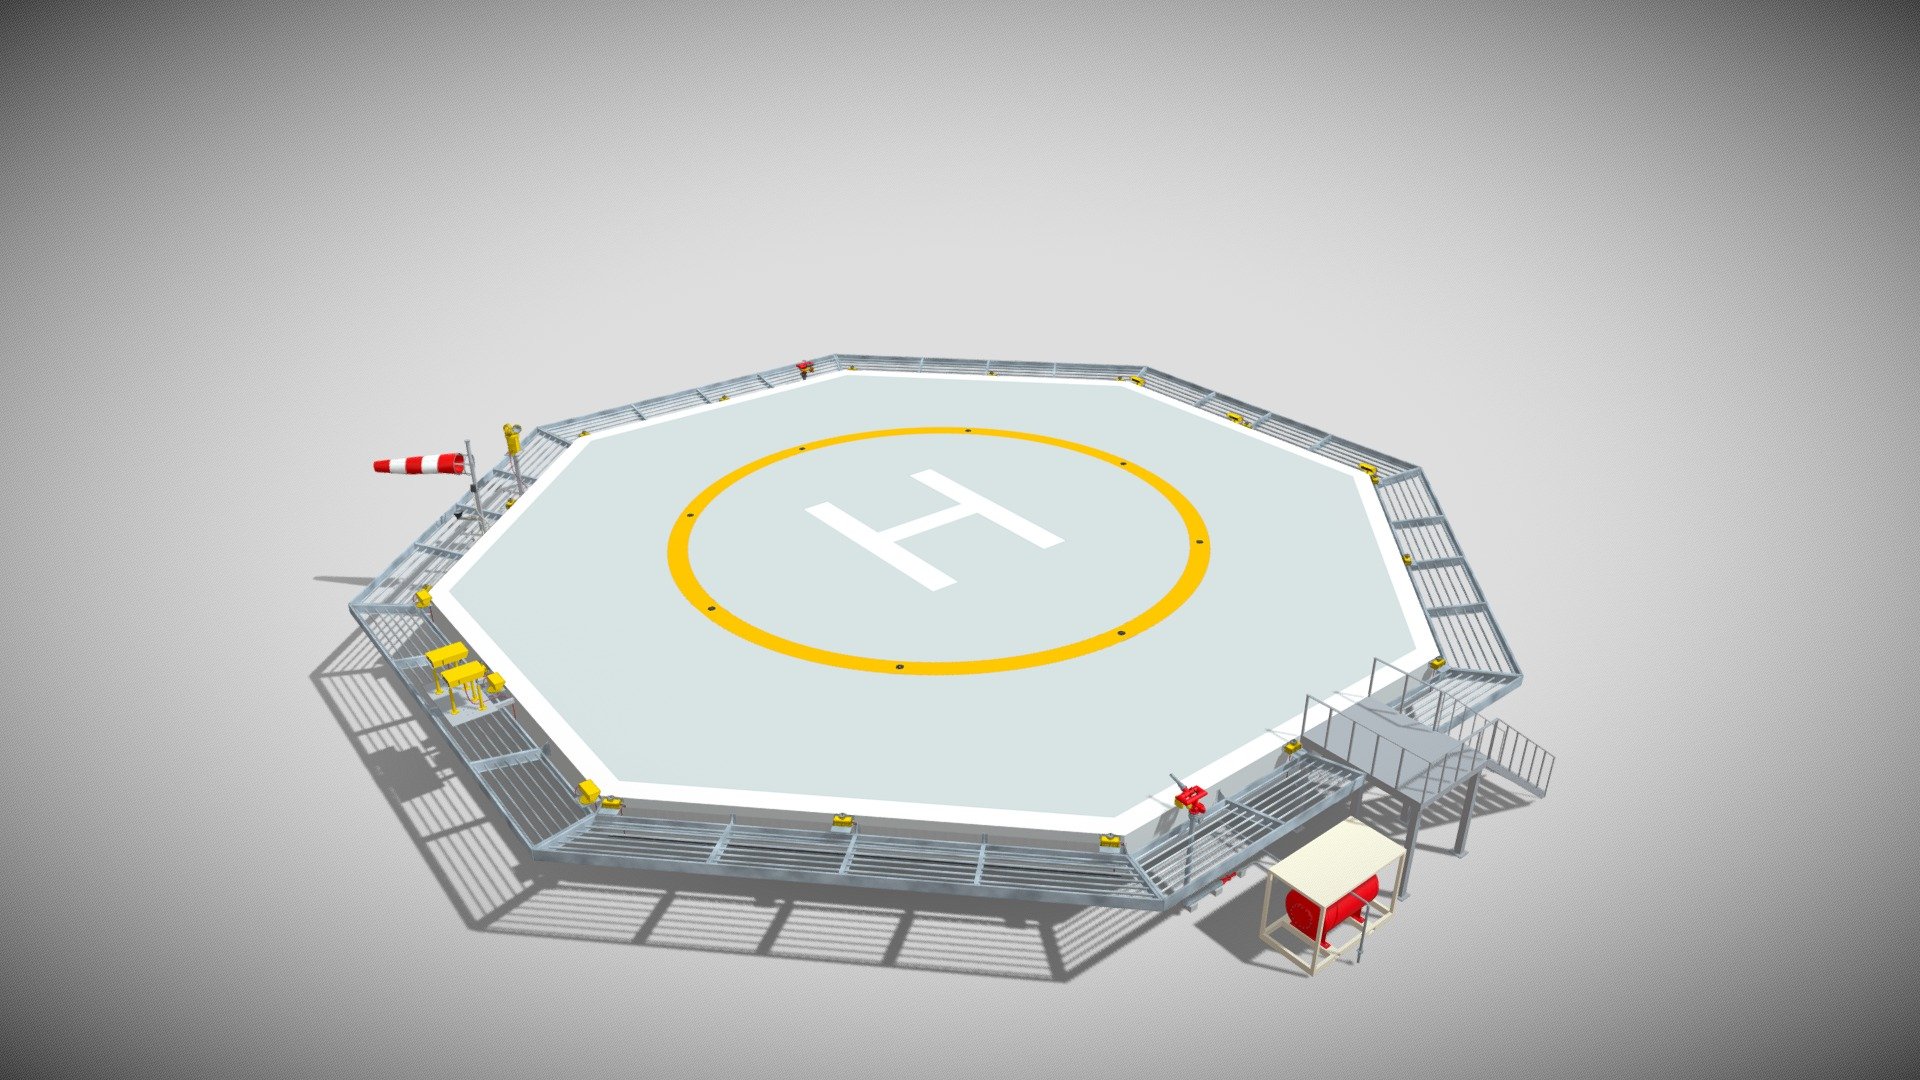 Detailed model of an Octagonal Heliport, modeled in Cinema 4D.The model was created using approximate real world dimensions.

The model has 640,974 polys and 619,451 vertices.

An additional file has been provided containing the original Cinema 4D project files, textures and other 3d export files such as 3ds, fbx and obj 3d model